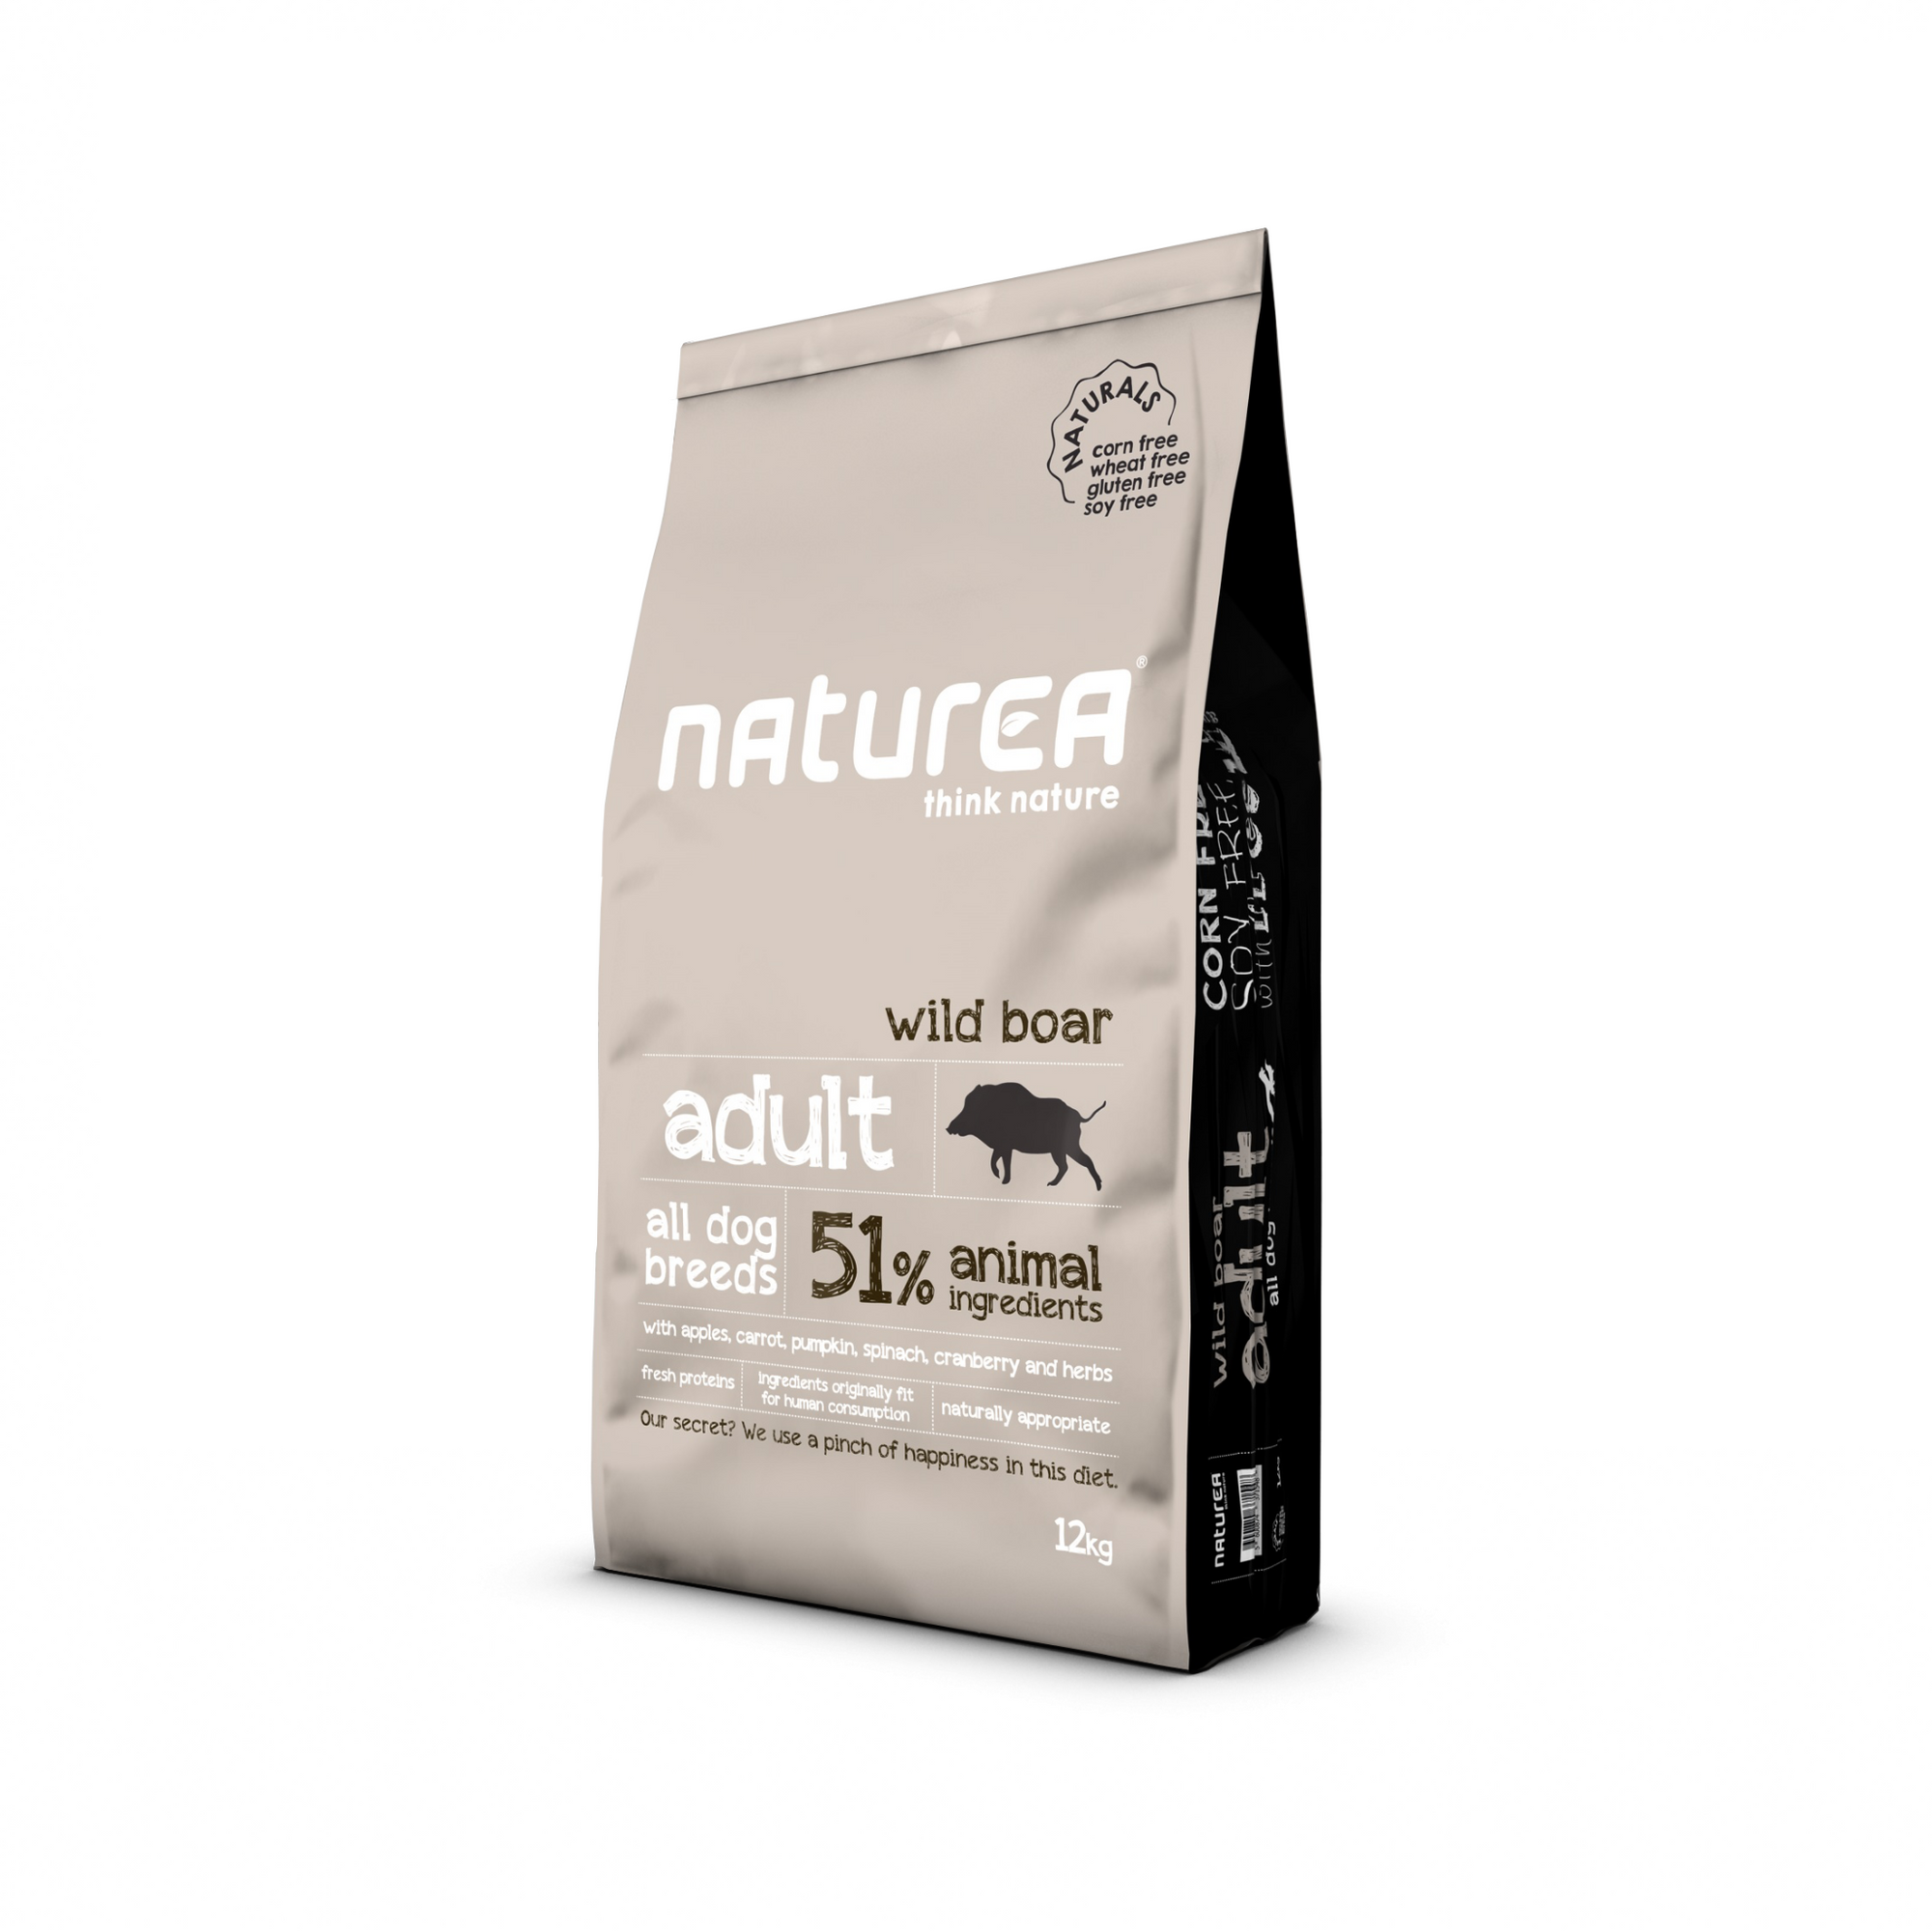 High-quality feed with wild boar meat for adult dogs Naturea Naturals